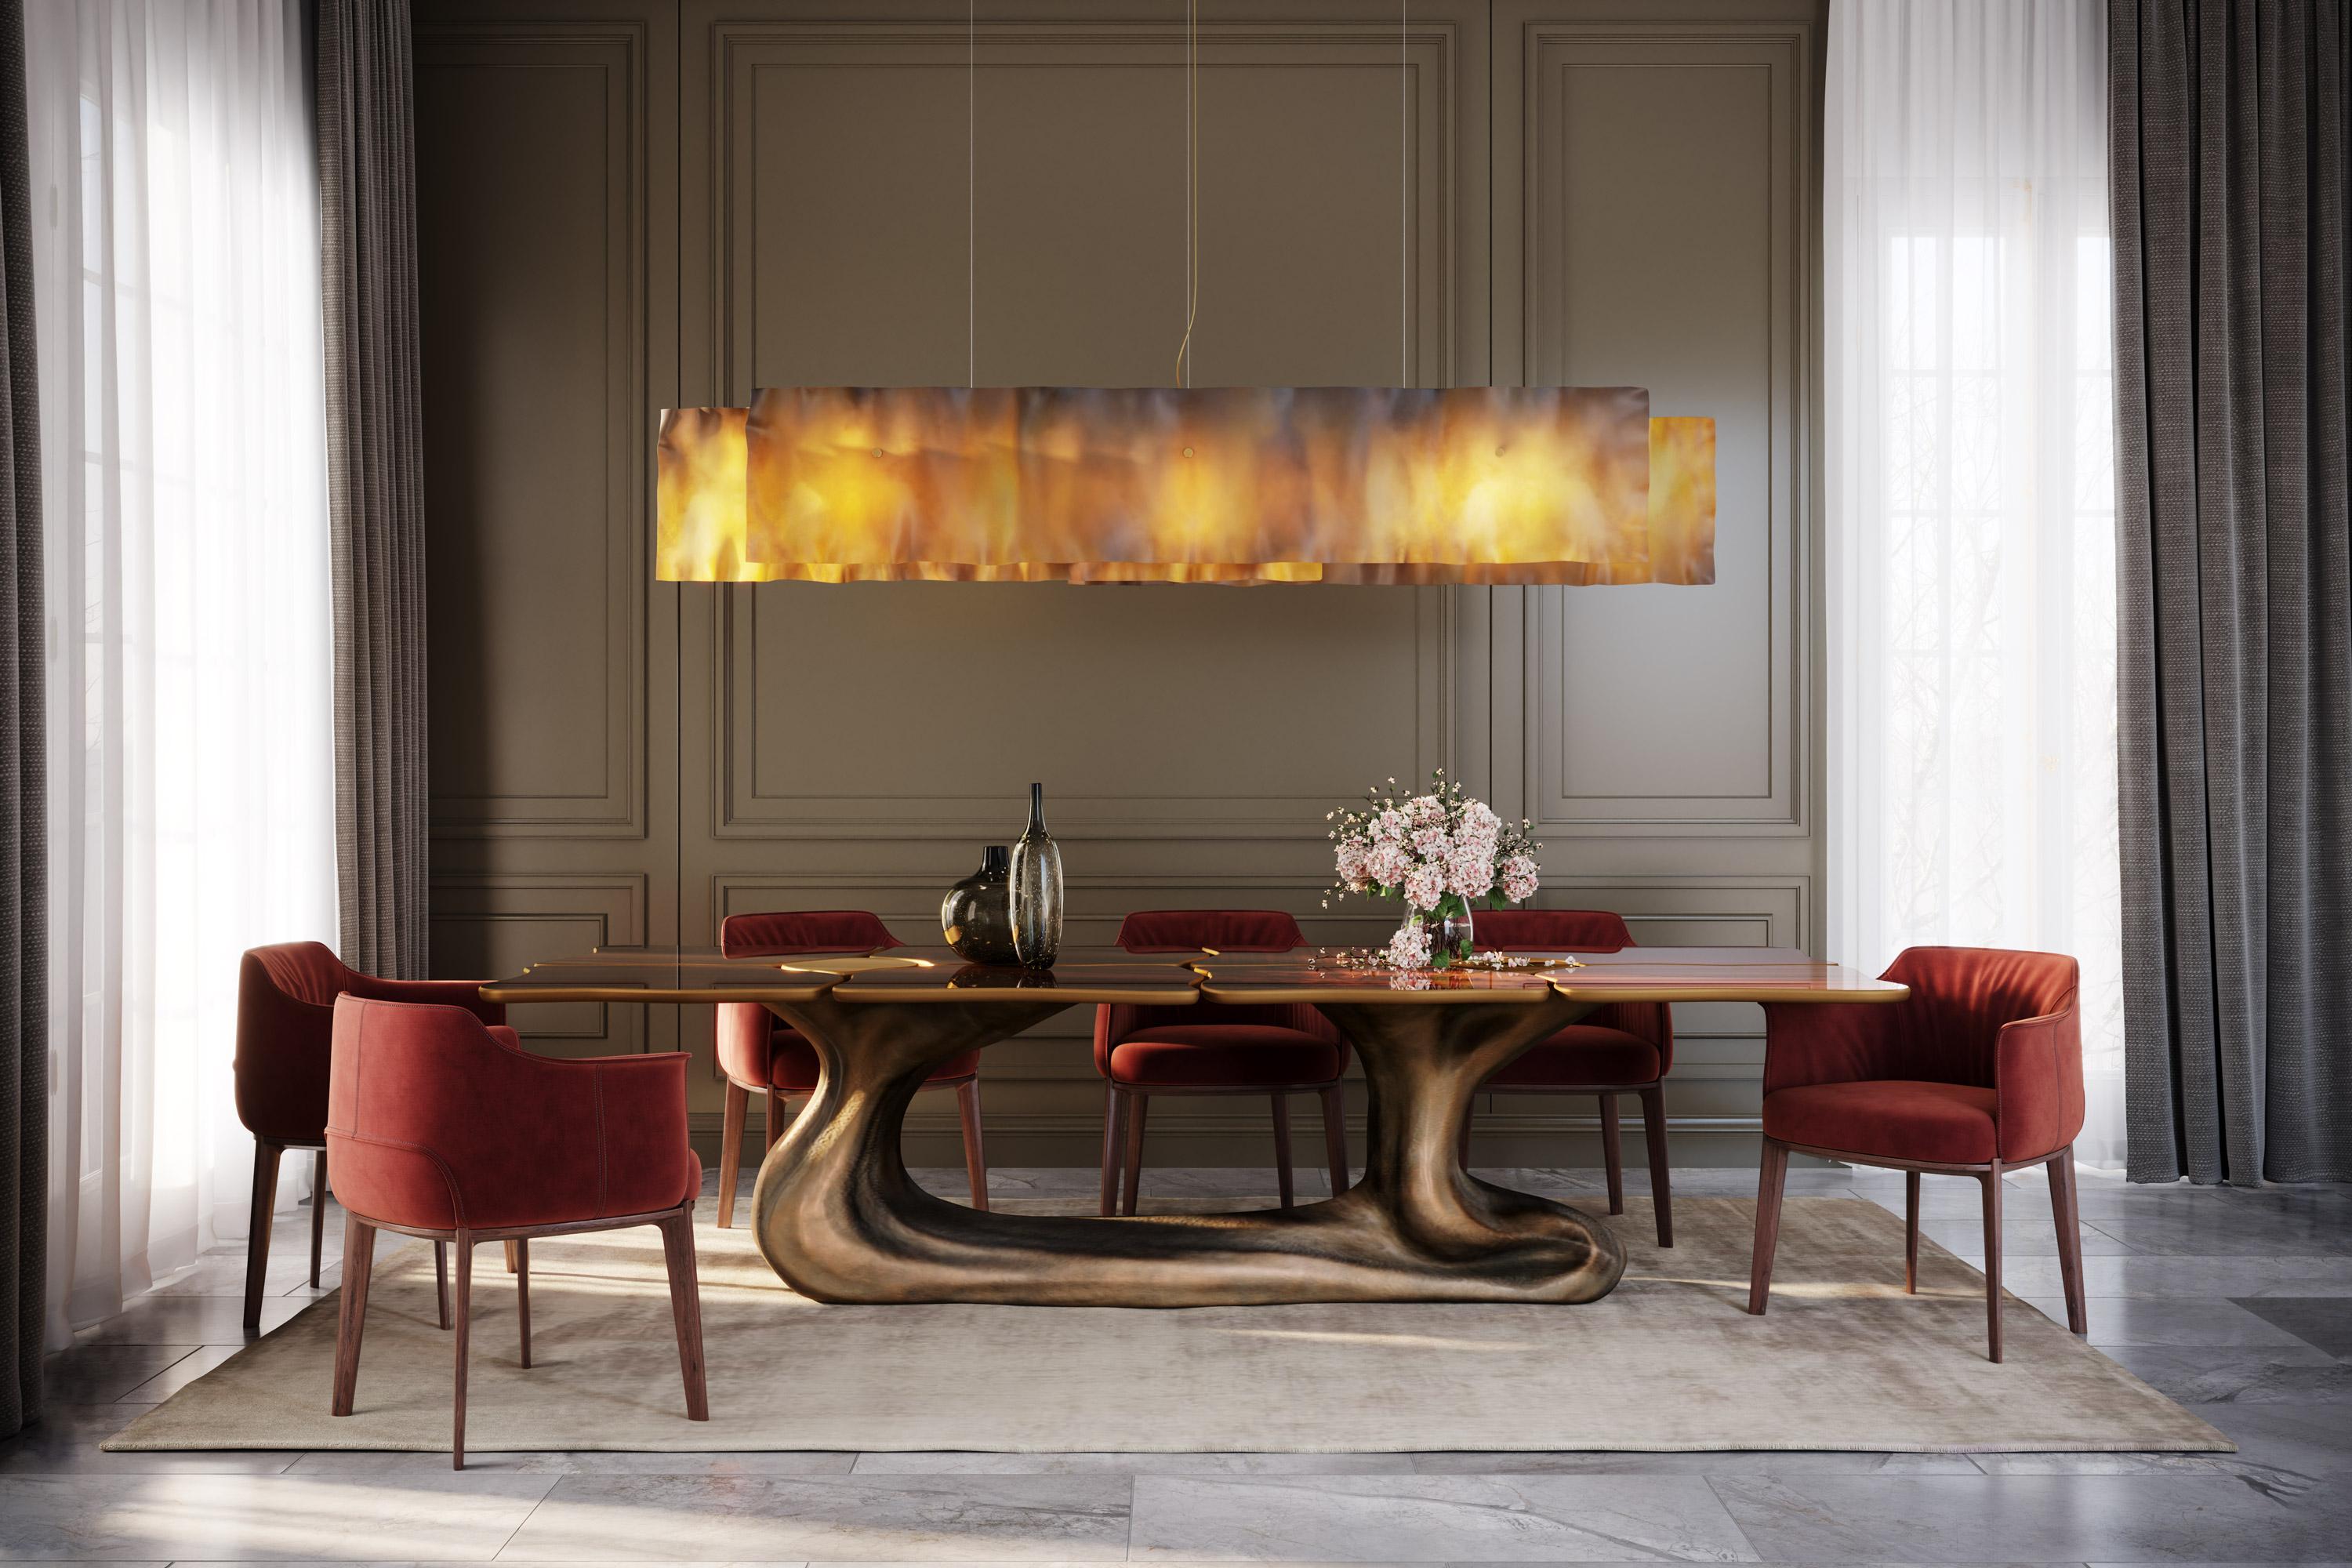 Sigma is a luxurious and sculptural dining table that is handmade produced in resin reinforced with fiberglass and combines bold finishes with amazing materials and textures. Its table top is made of walnut root veneer with high gloss finish and its